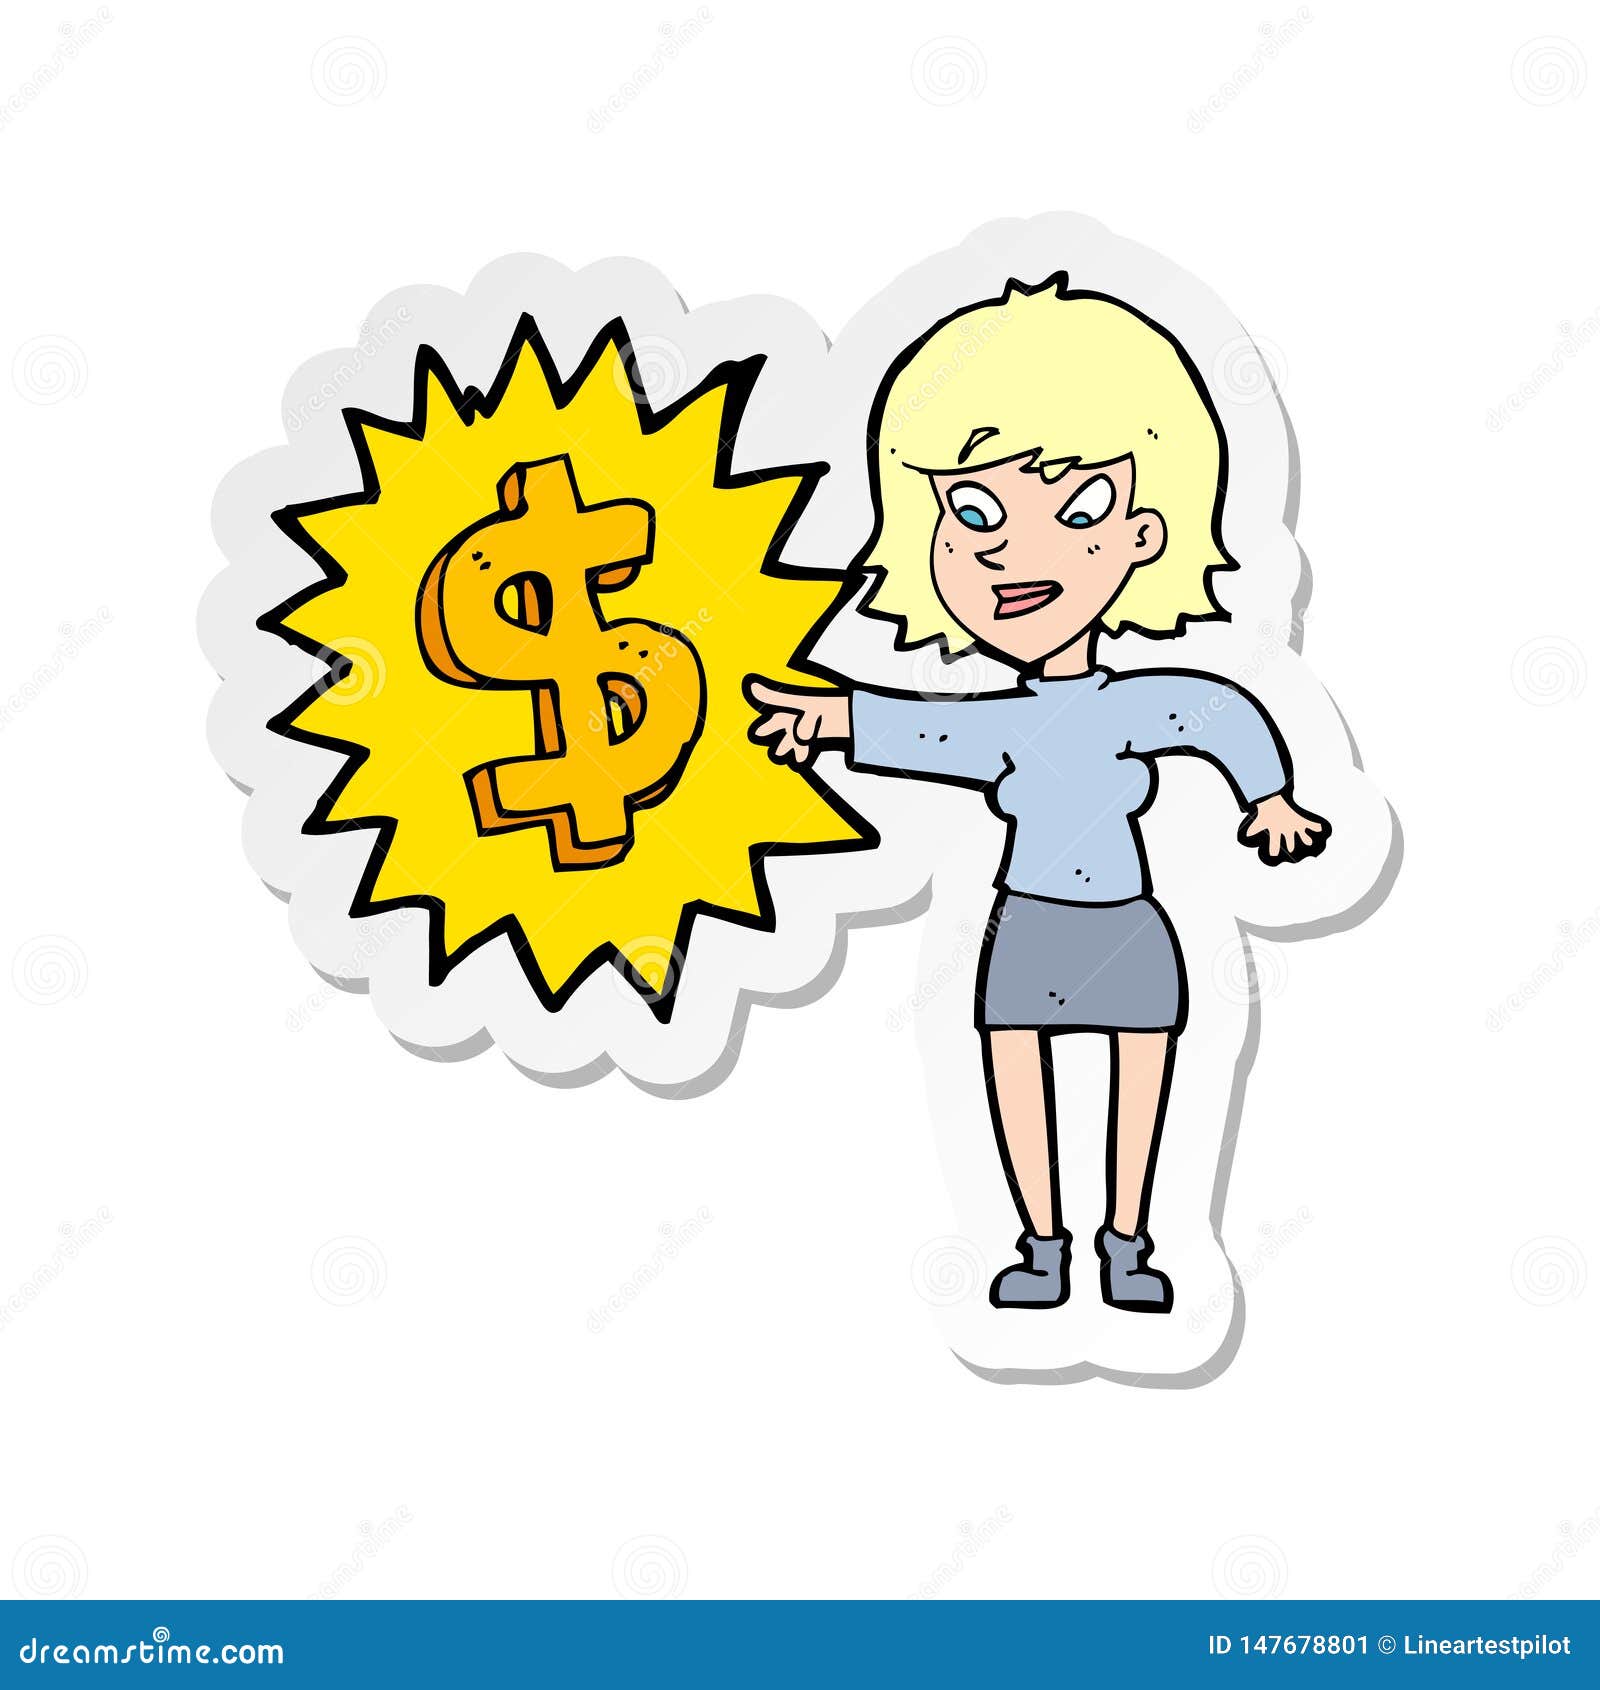 Sticker of a Making Money Cartoon Stock Vector - Illustration of business,  quirky: 147678801